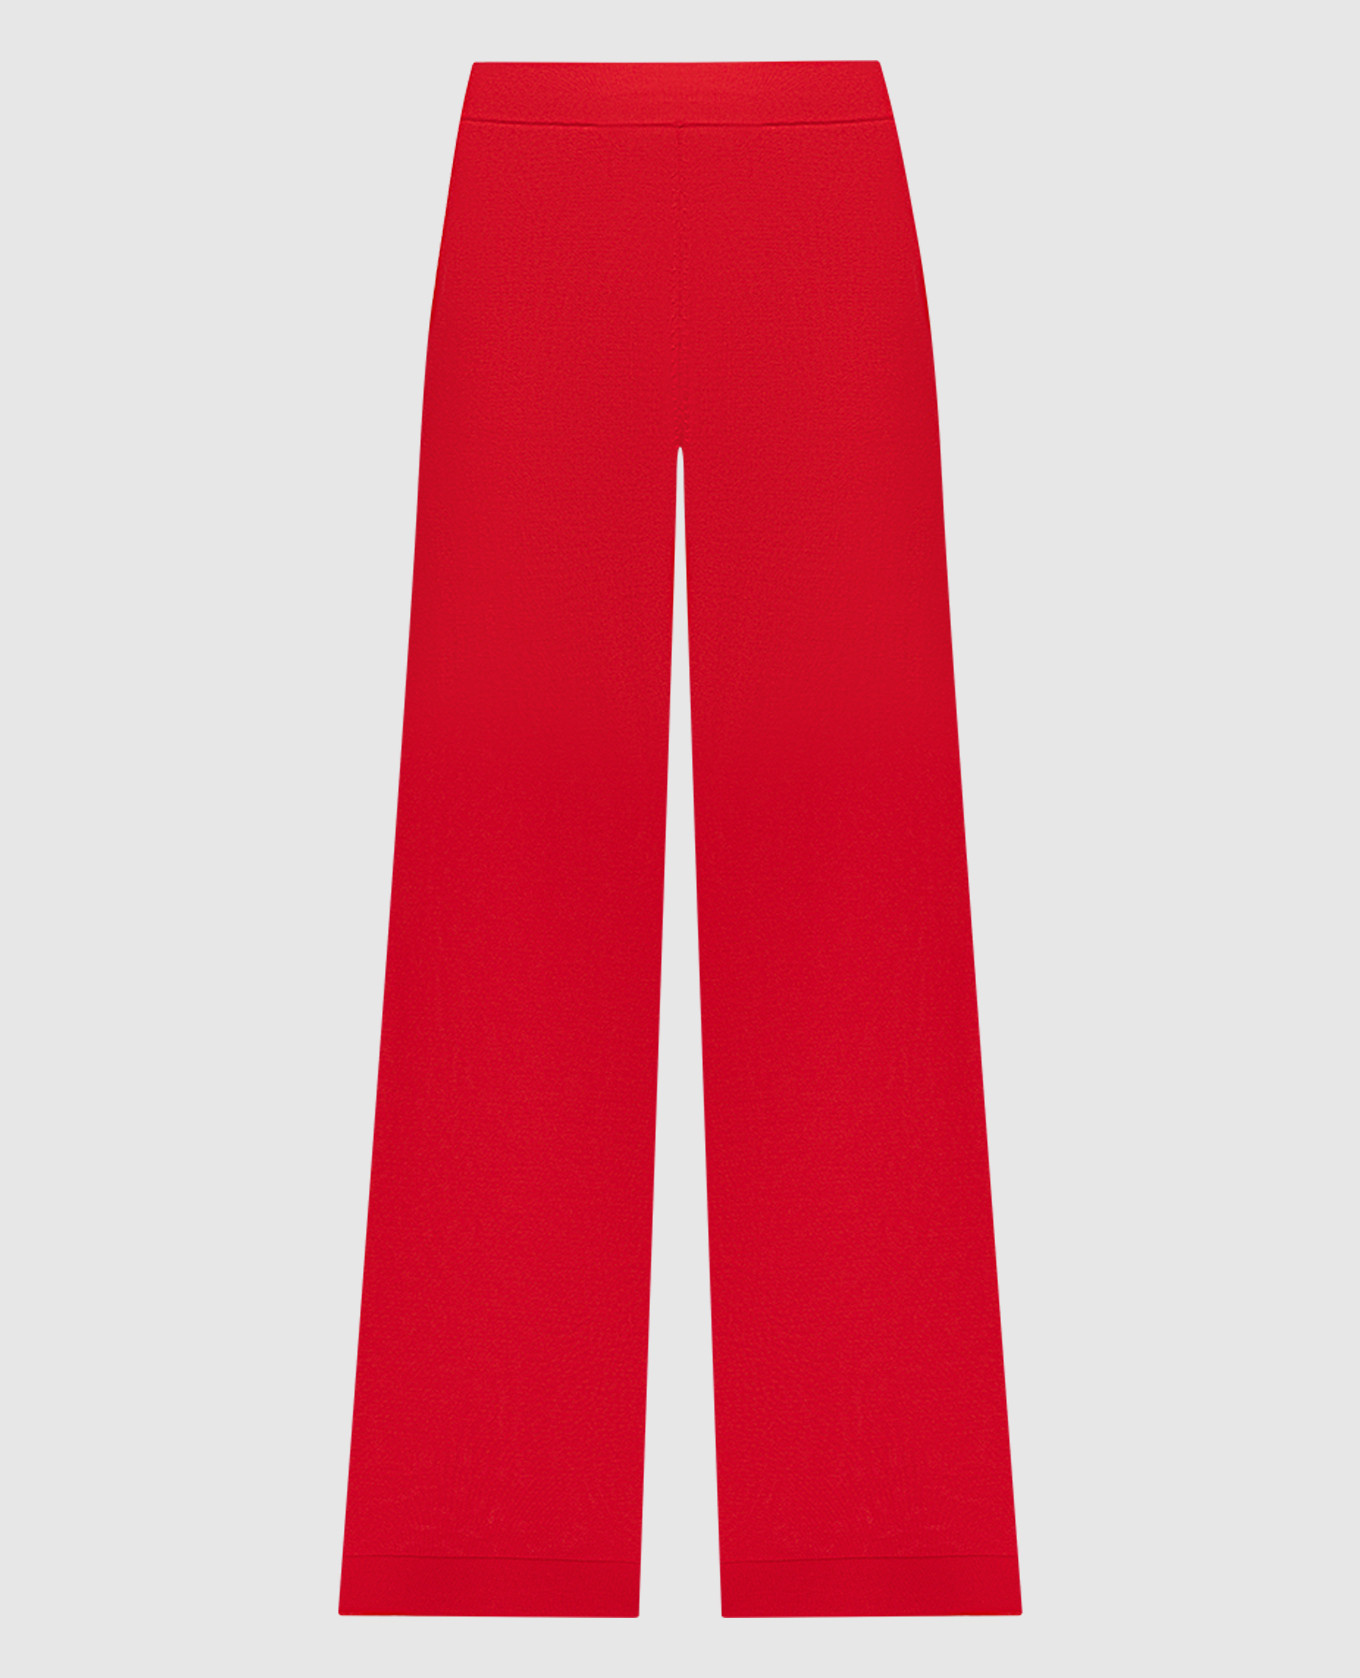 Red pants made of wool